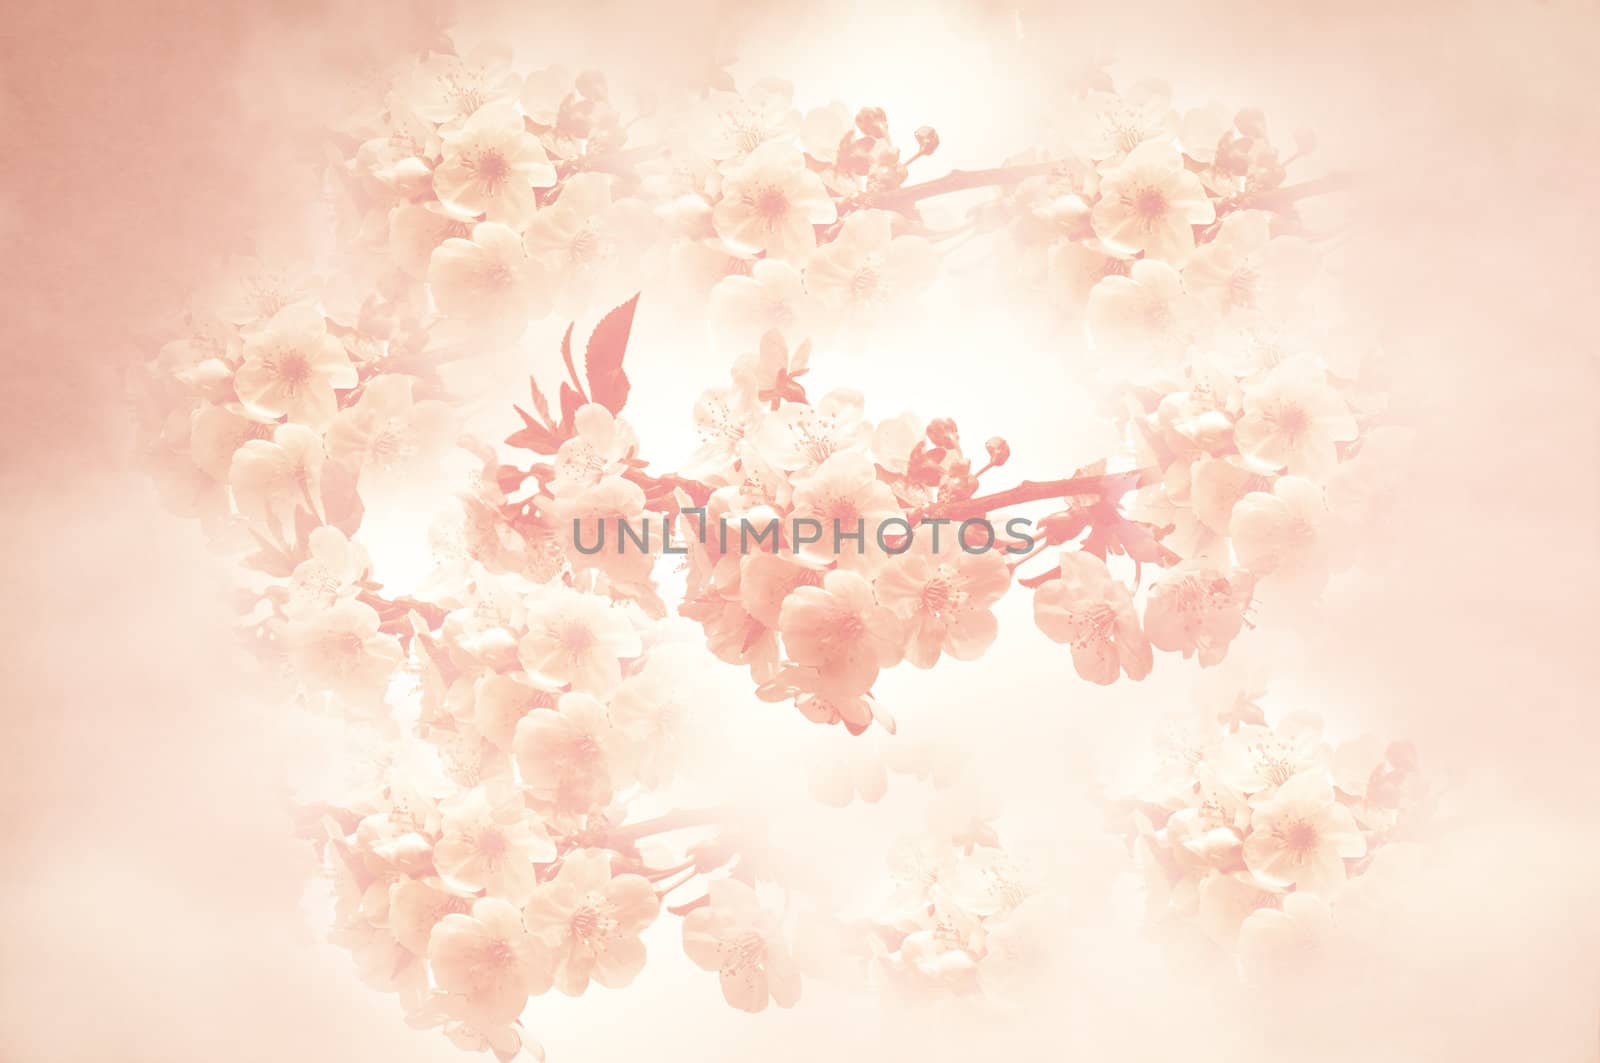 Romantic cherry blossom background texture in pink